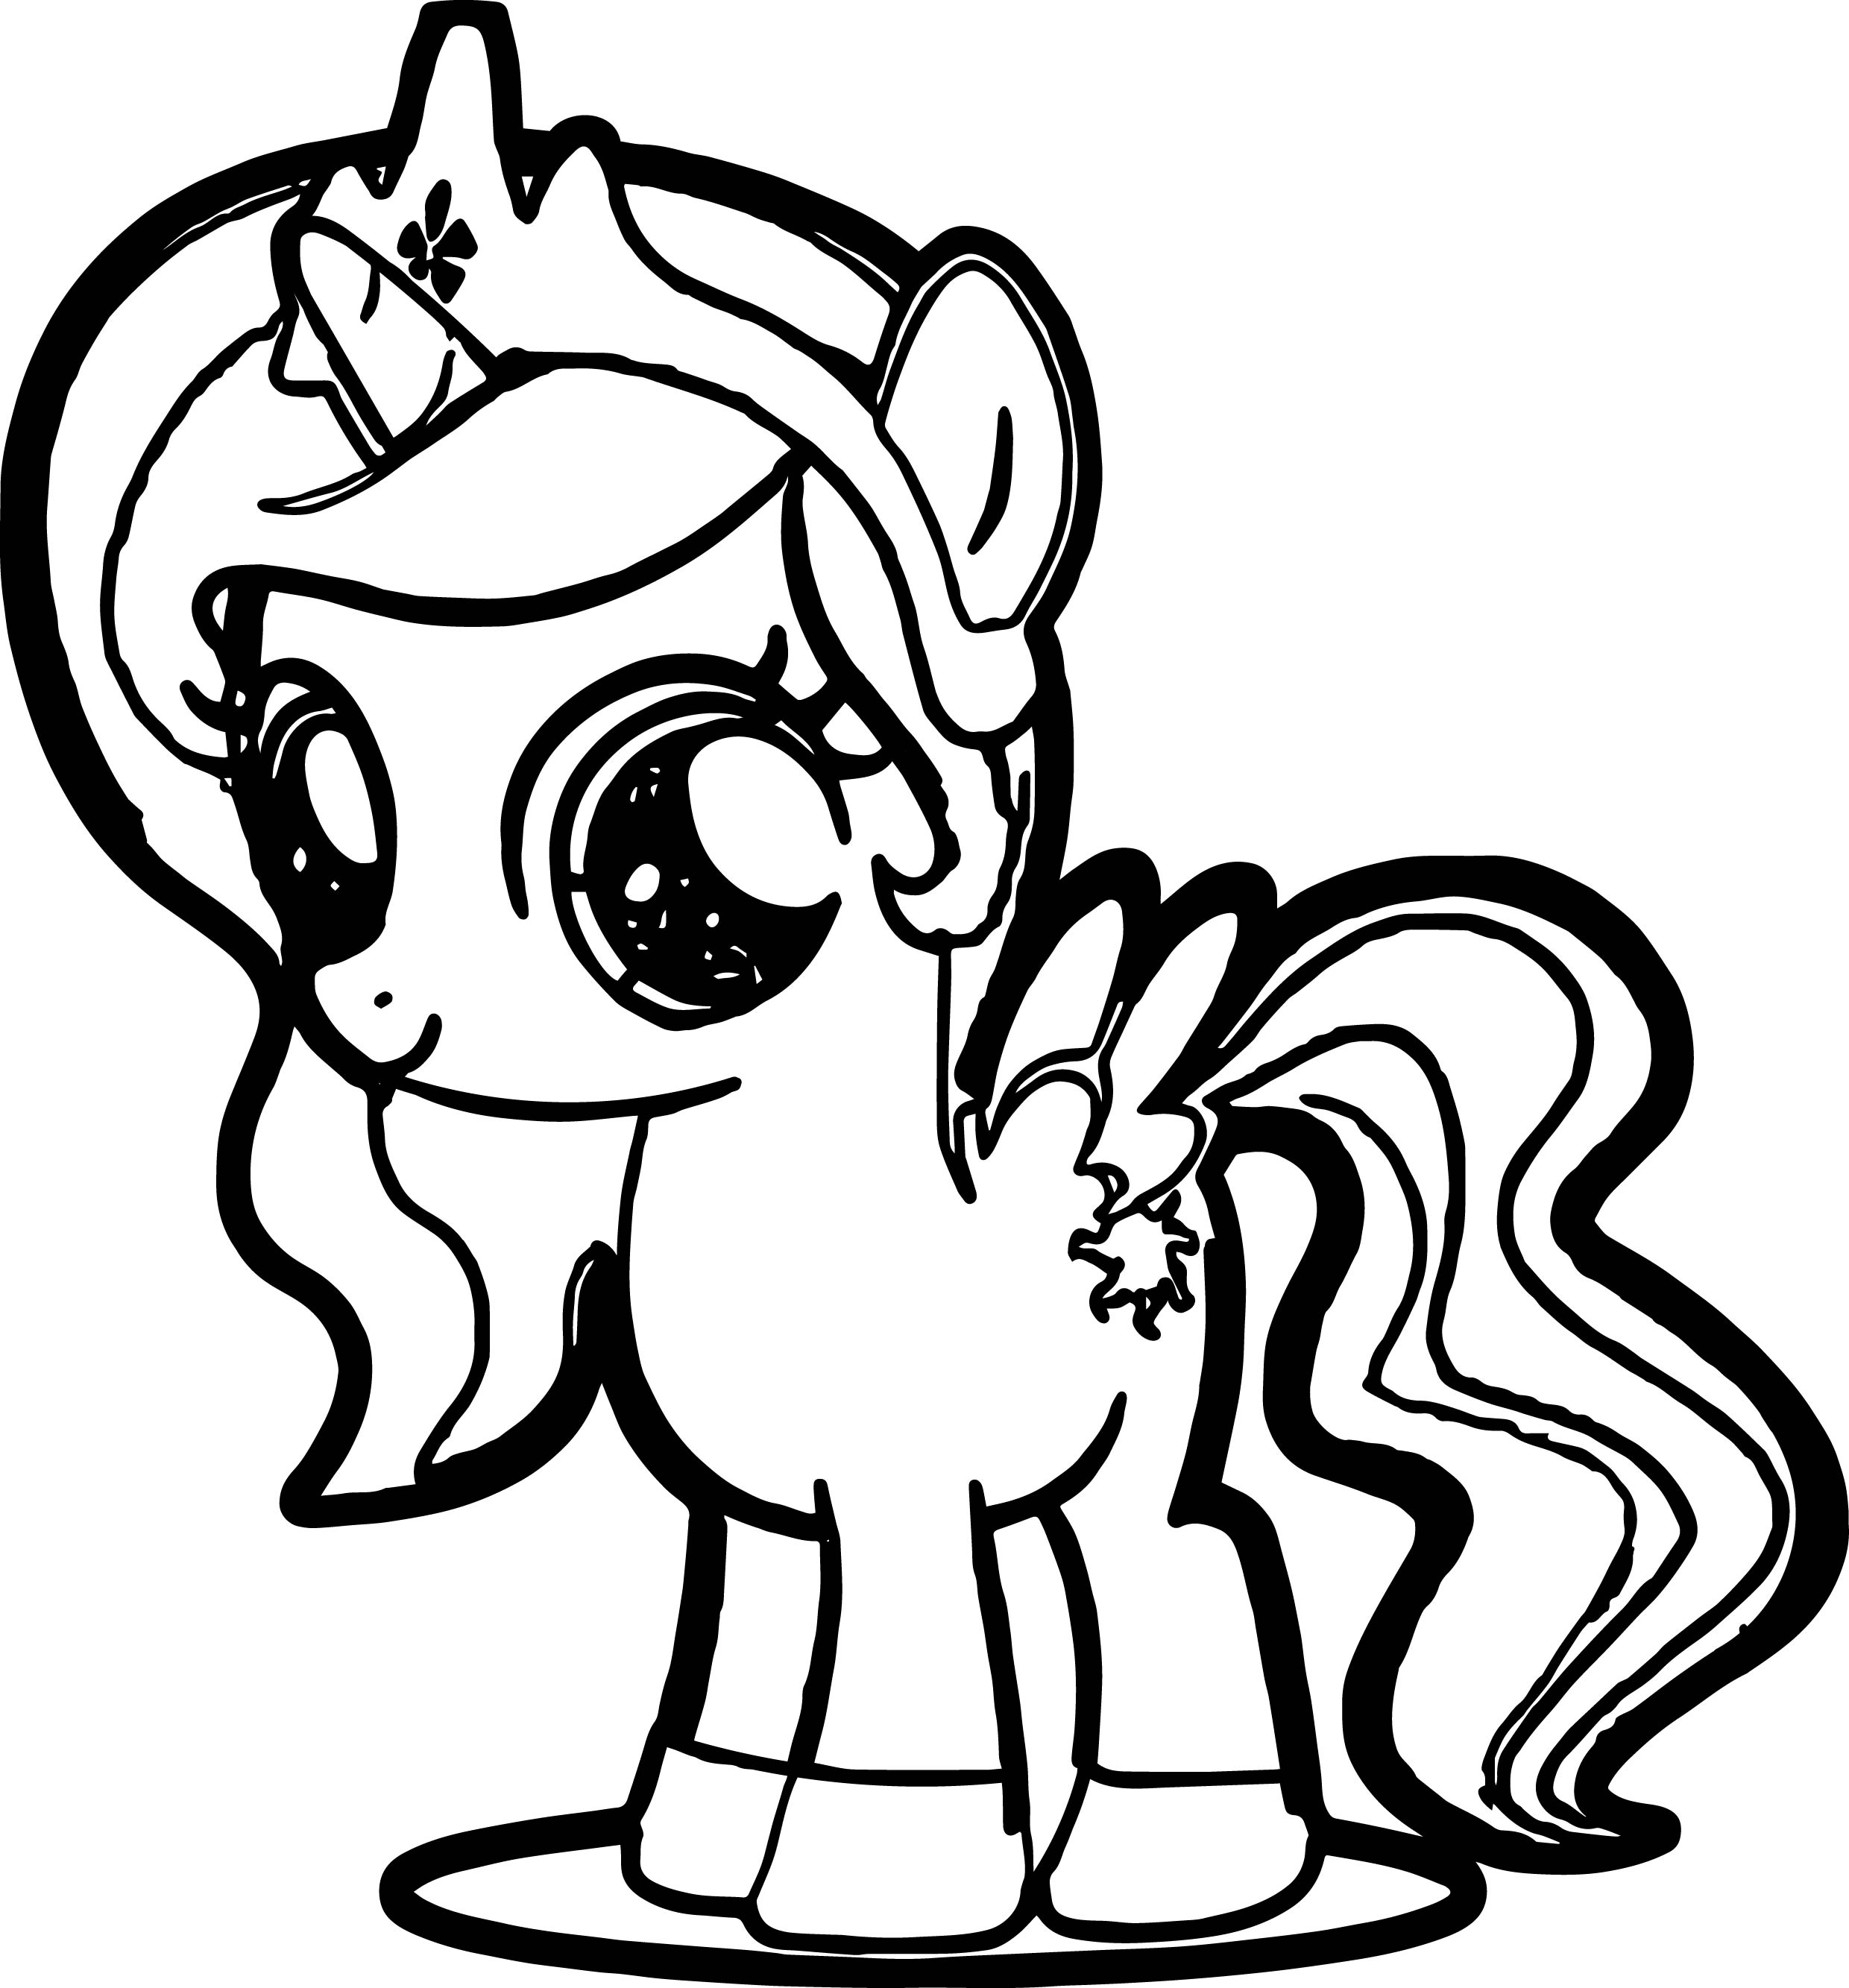 Cute My Little Pony Coloring Pages at GetColorings.com ...